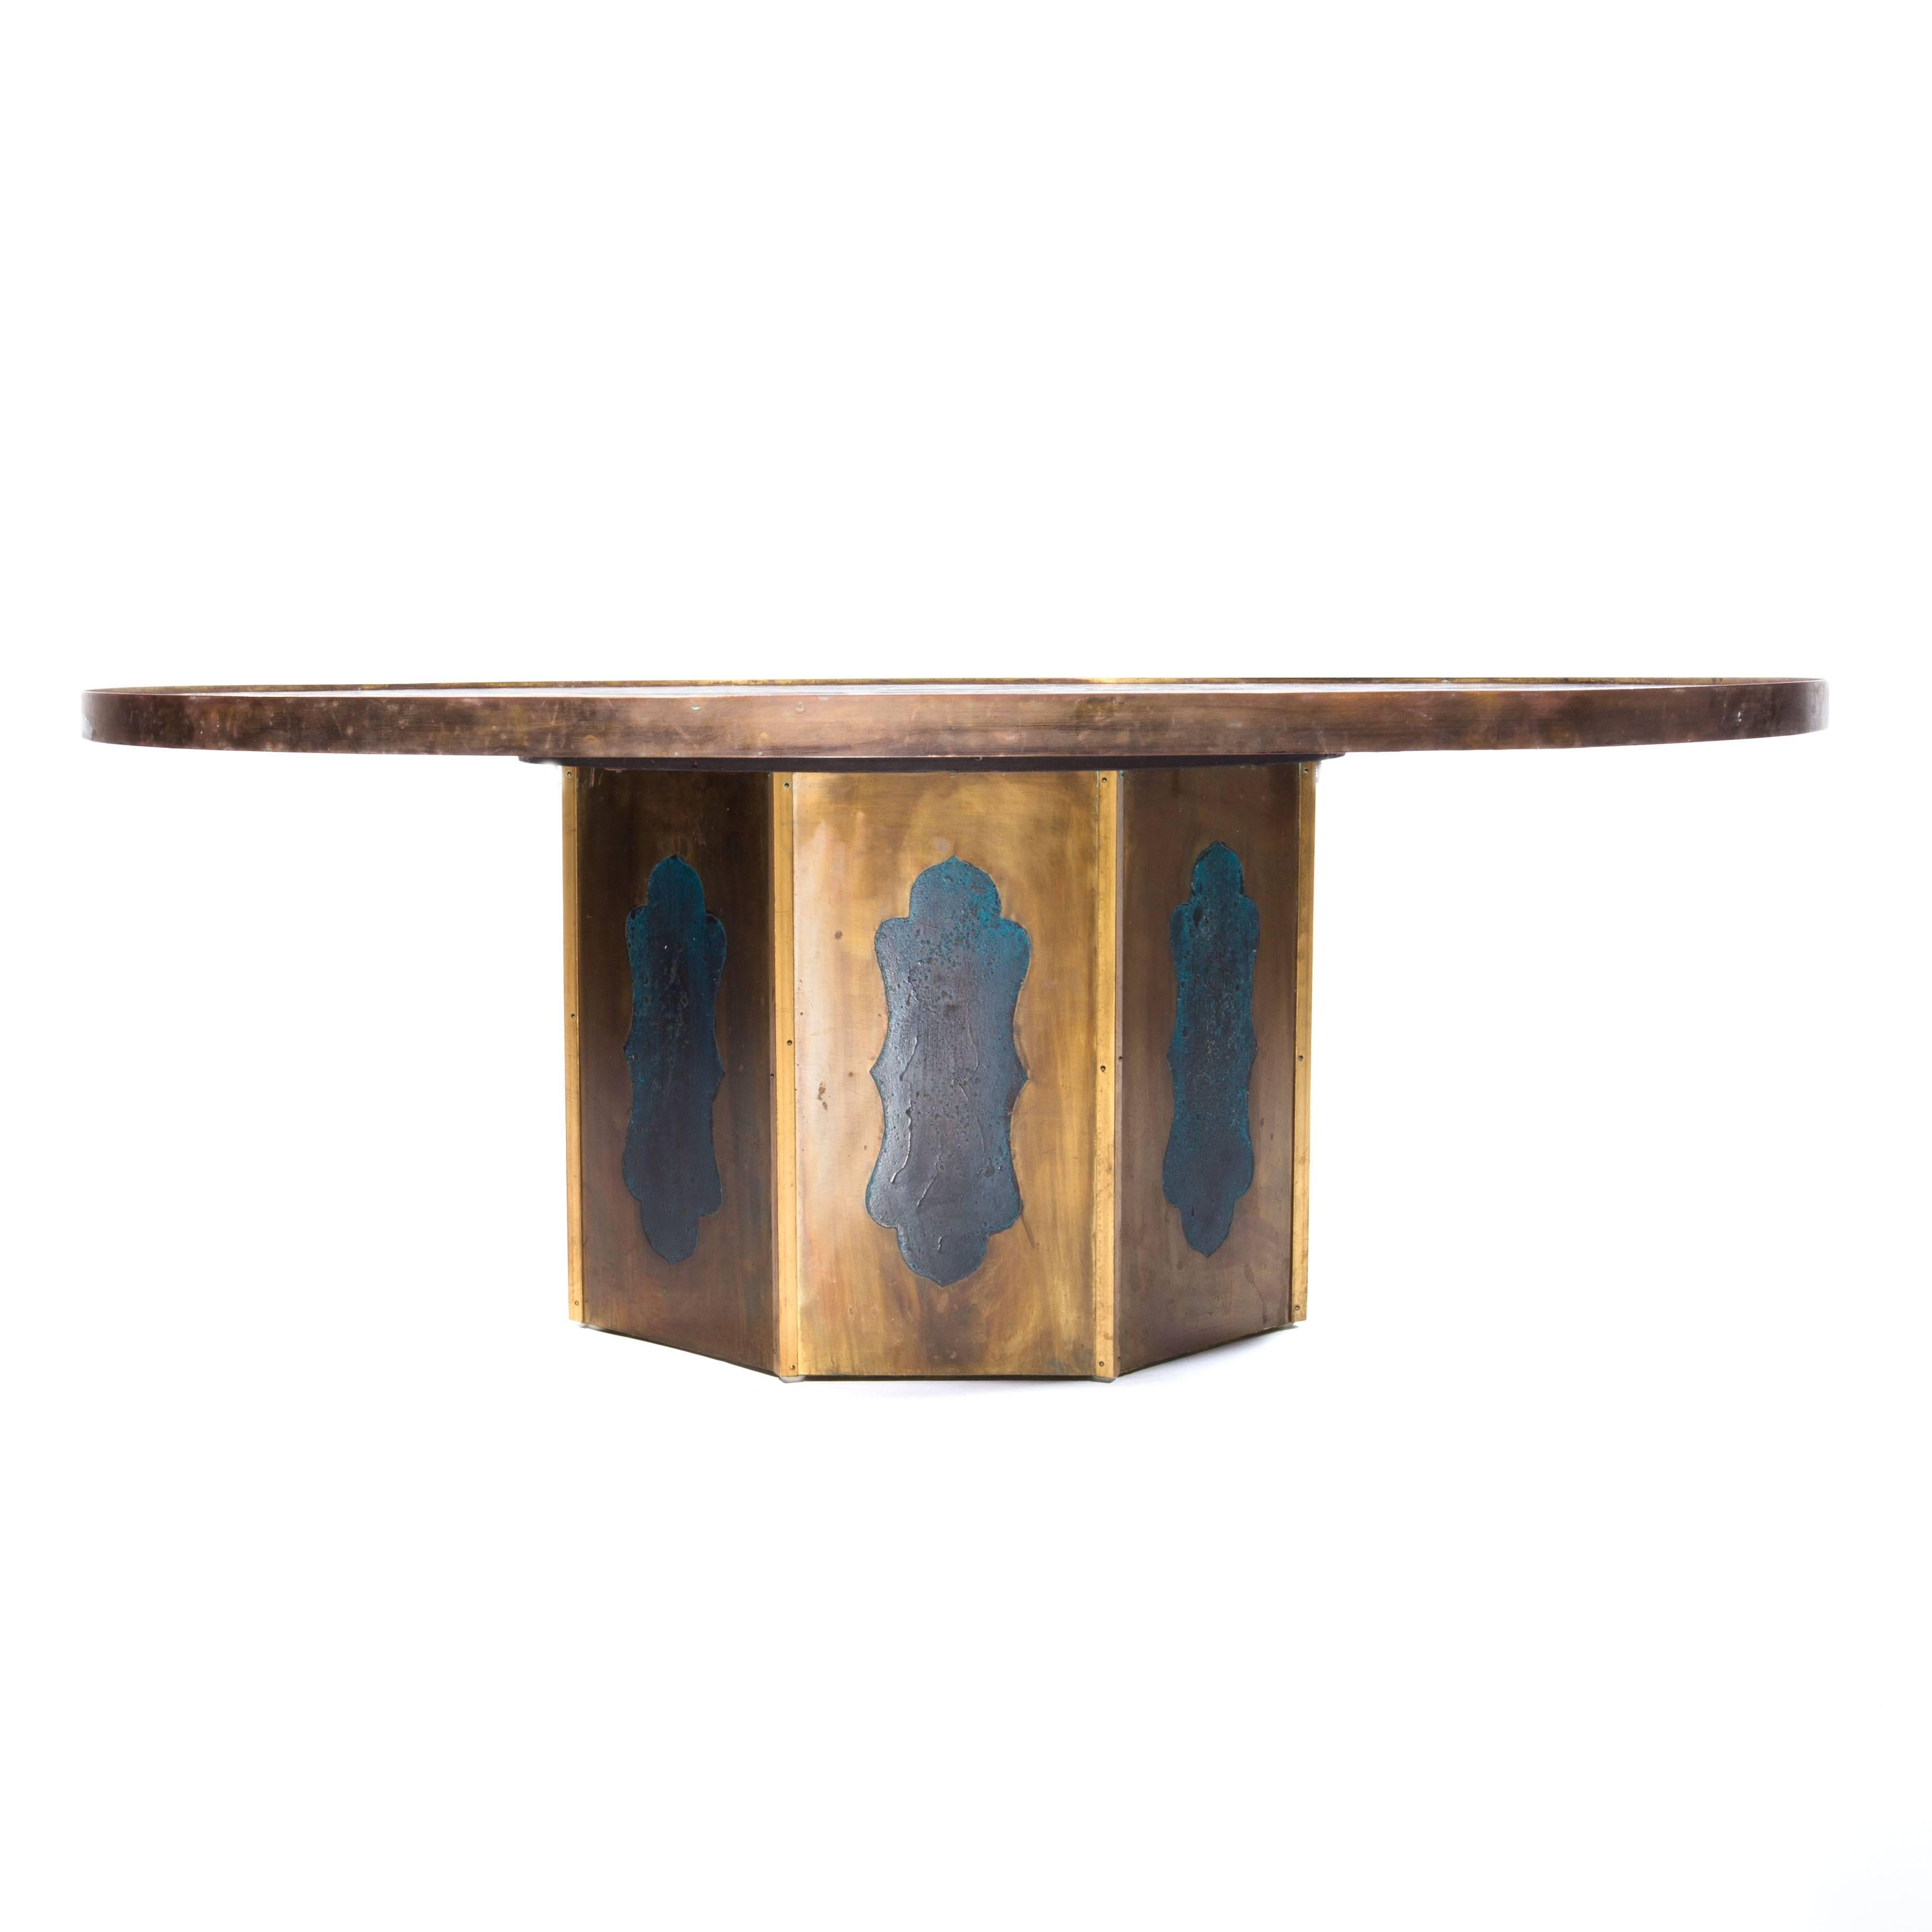 Large, signed Philip and Kelvin LaVerne "Chan" coffee table featuring an acid-etched top of patinated bronze, pewter and enamel depicting a village scene, supported by a weighted, eight-side bronze base with blue-enamelled insets in a